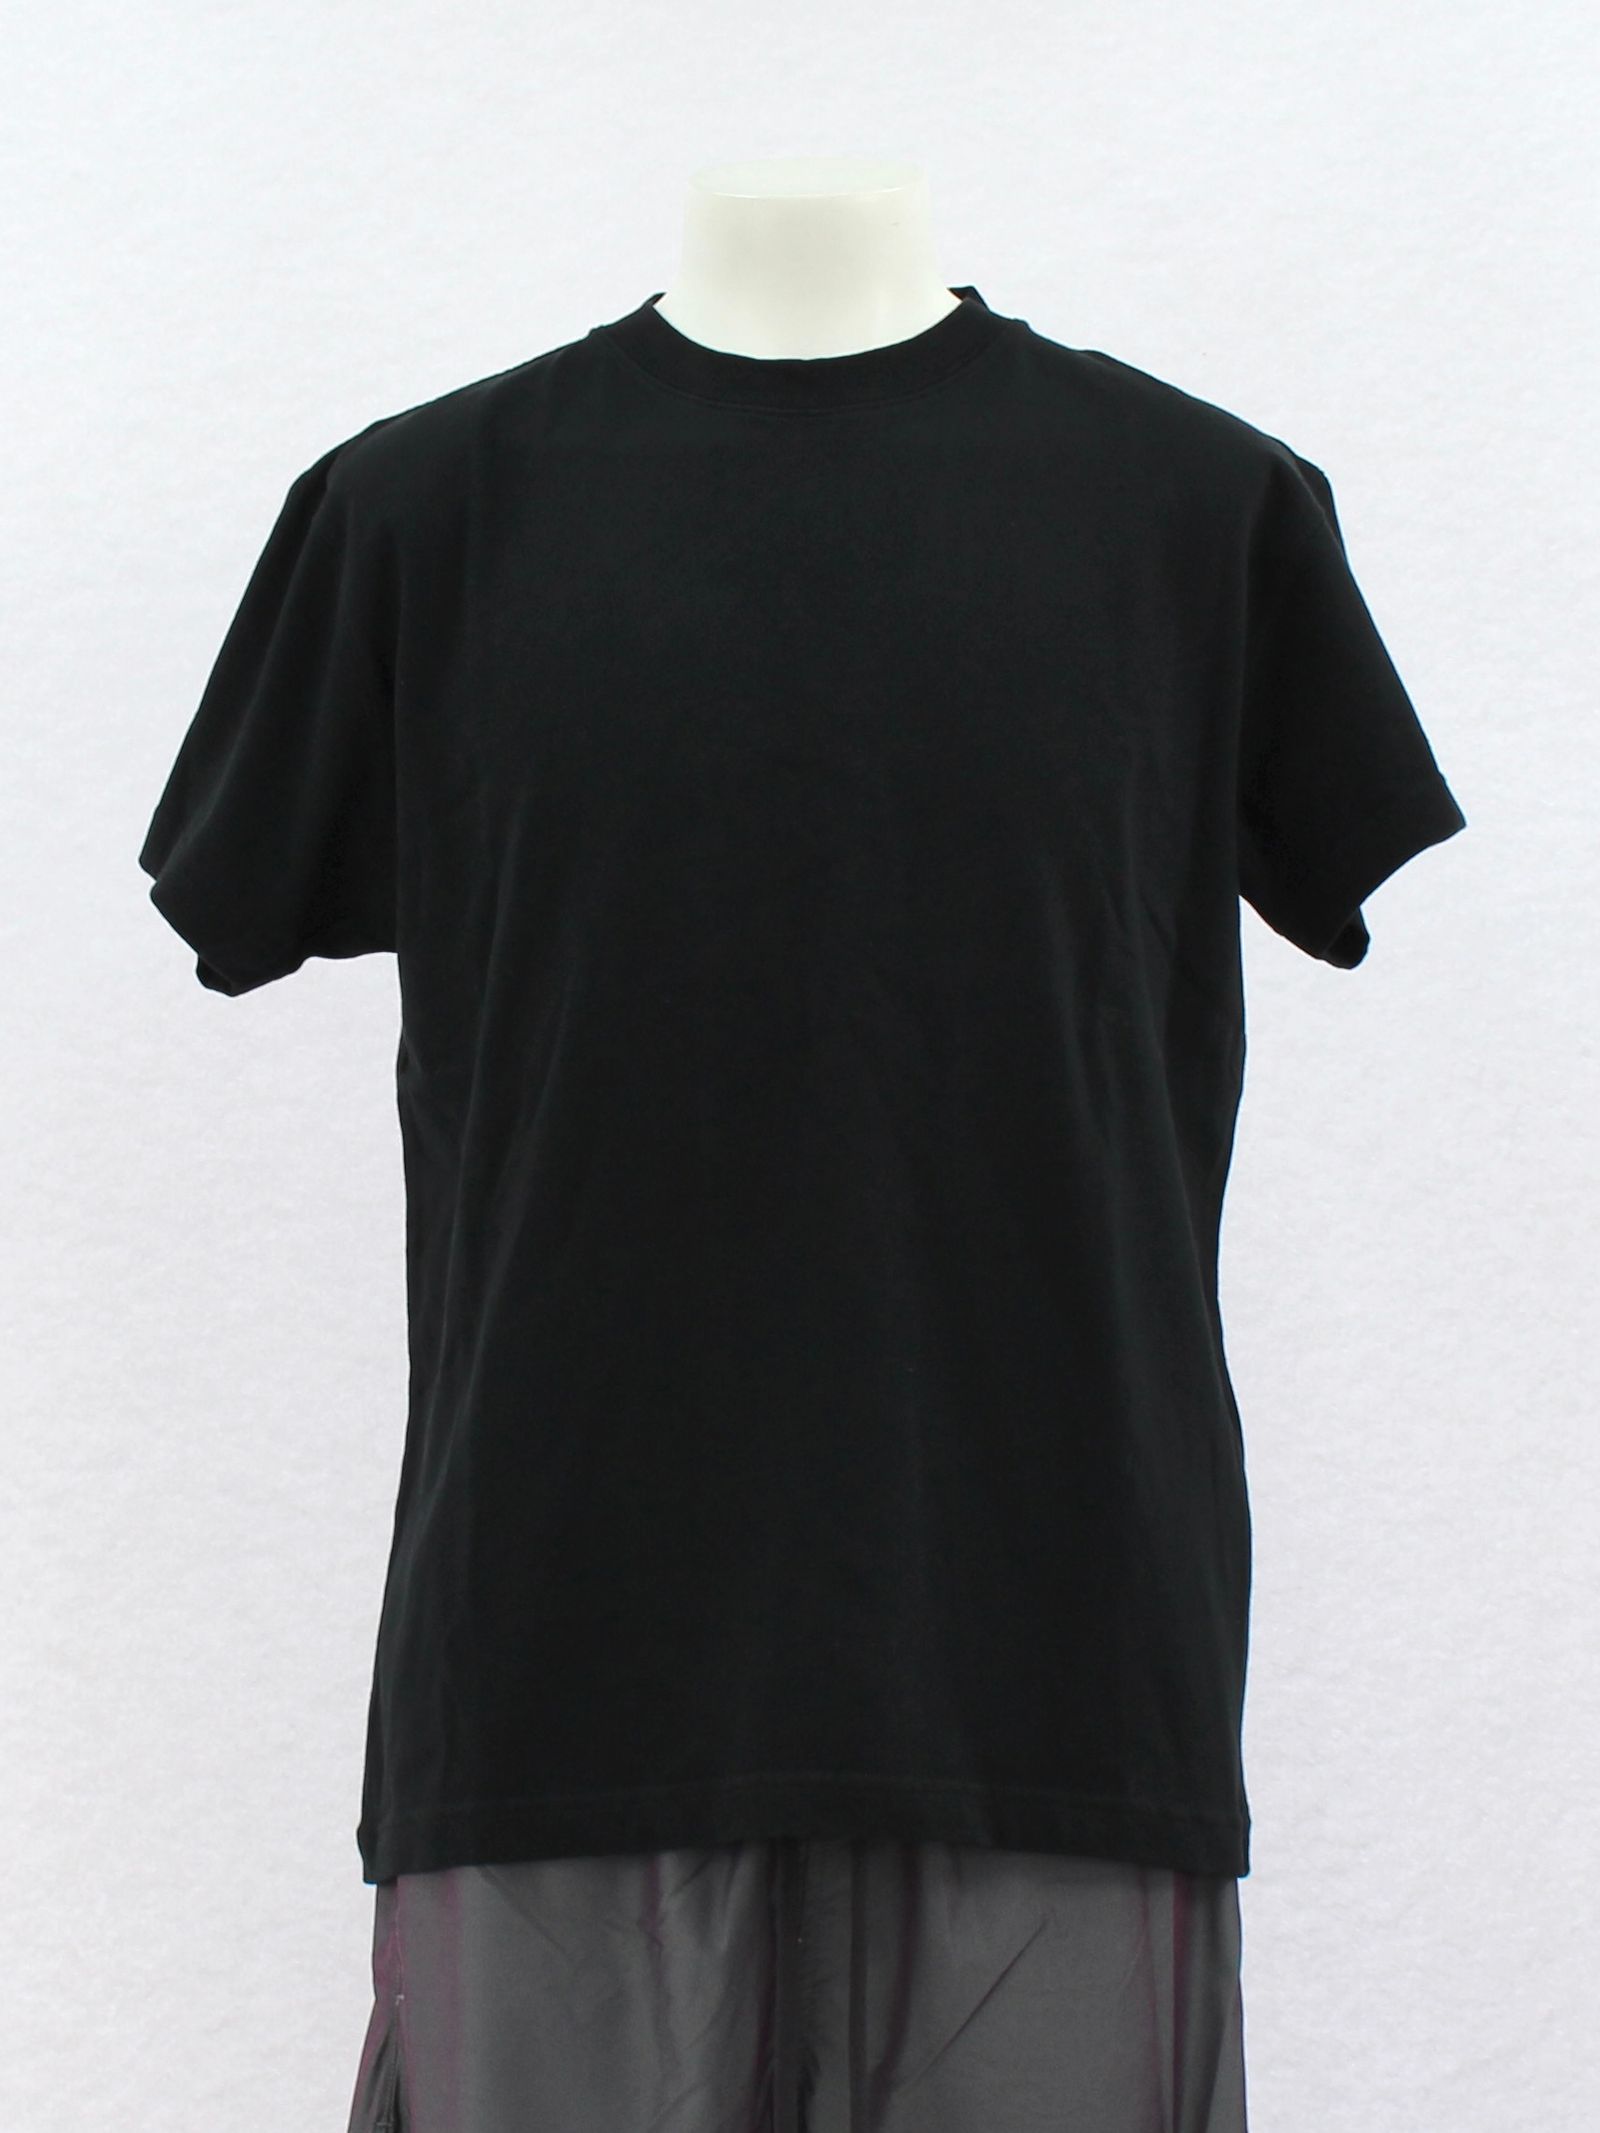 A-COLD-WALL 22SS GRAPHIC T-SHIRT